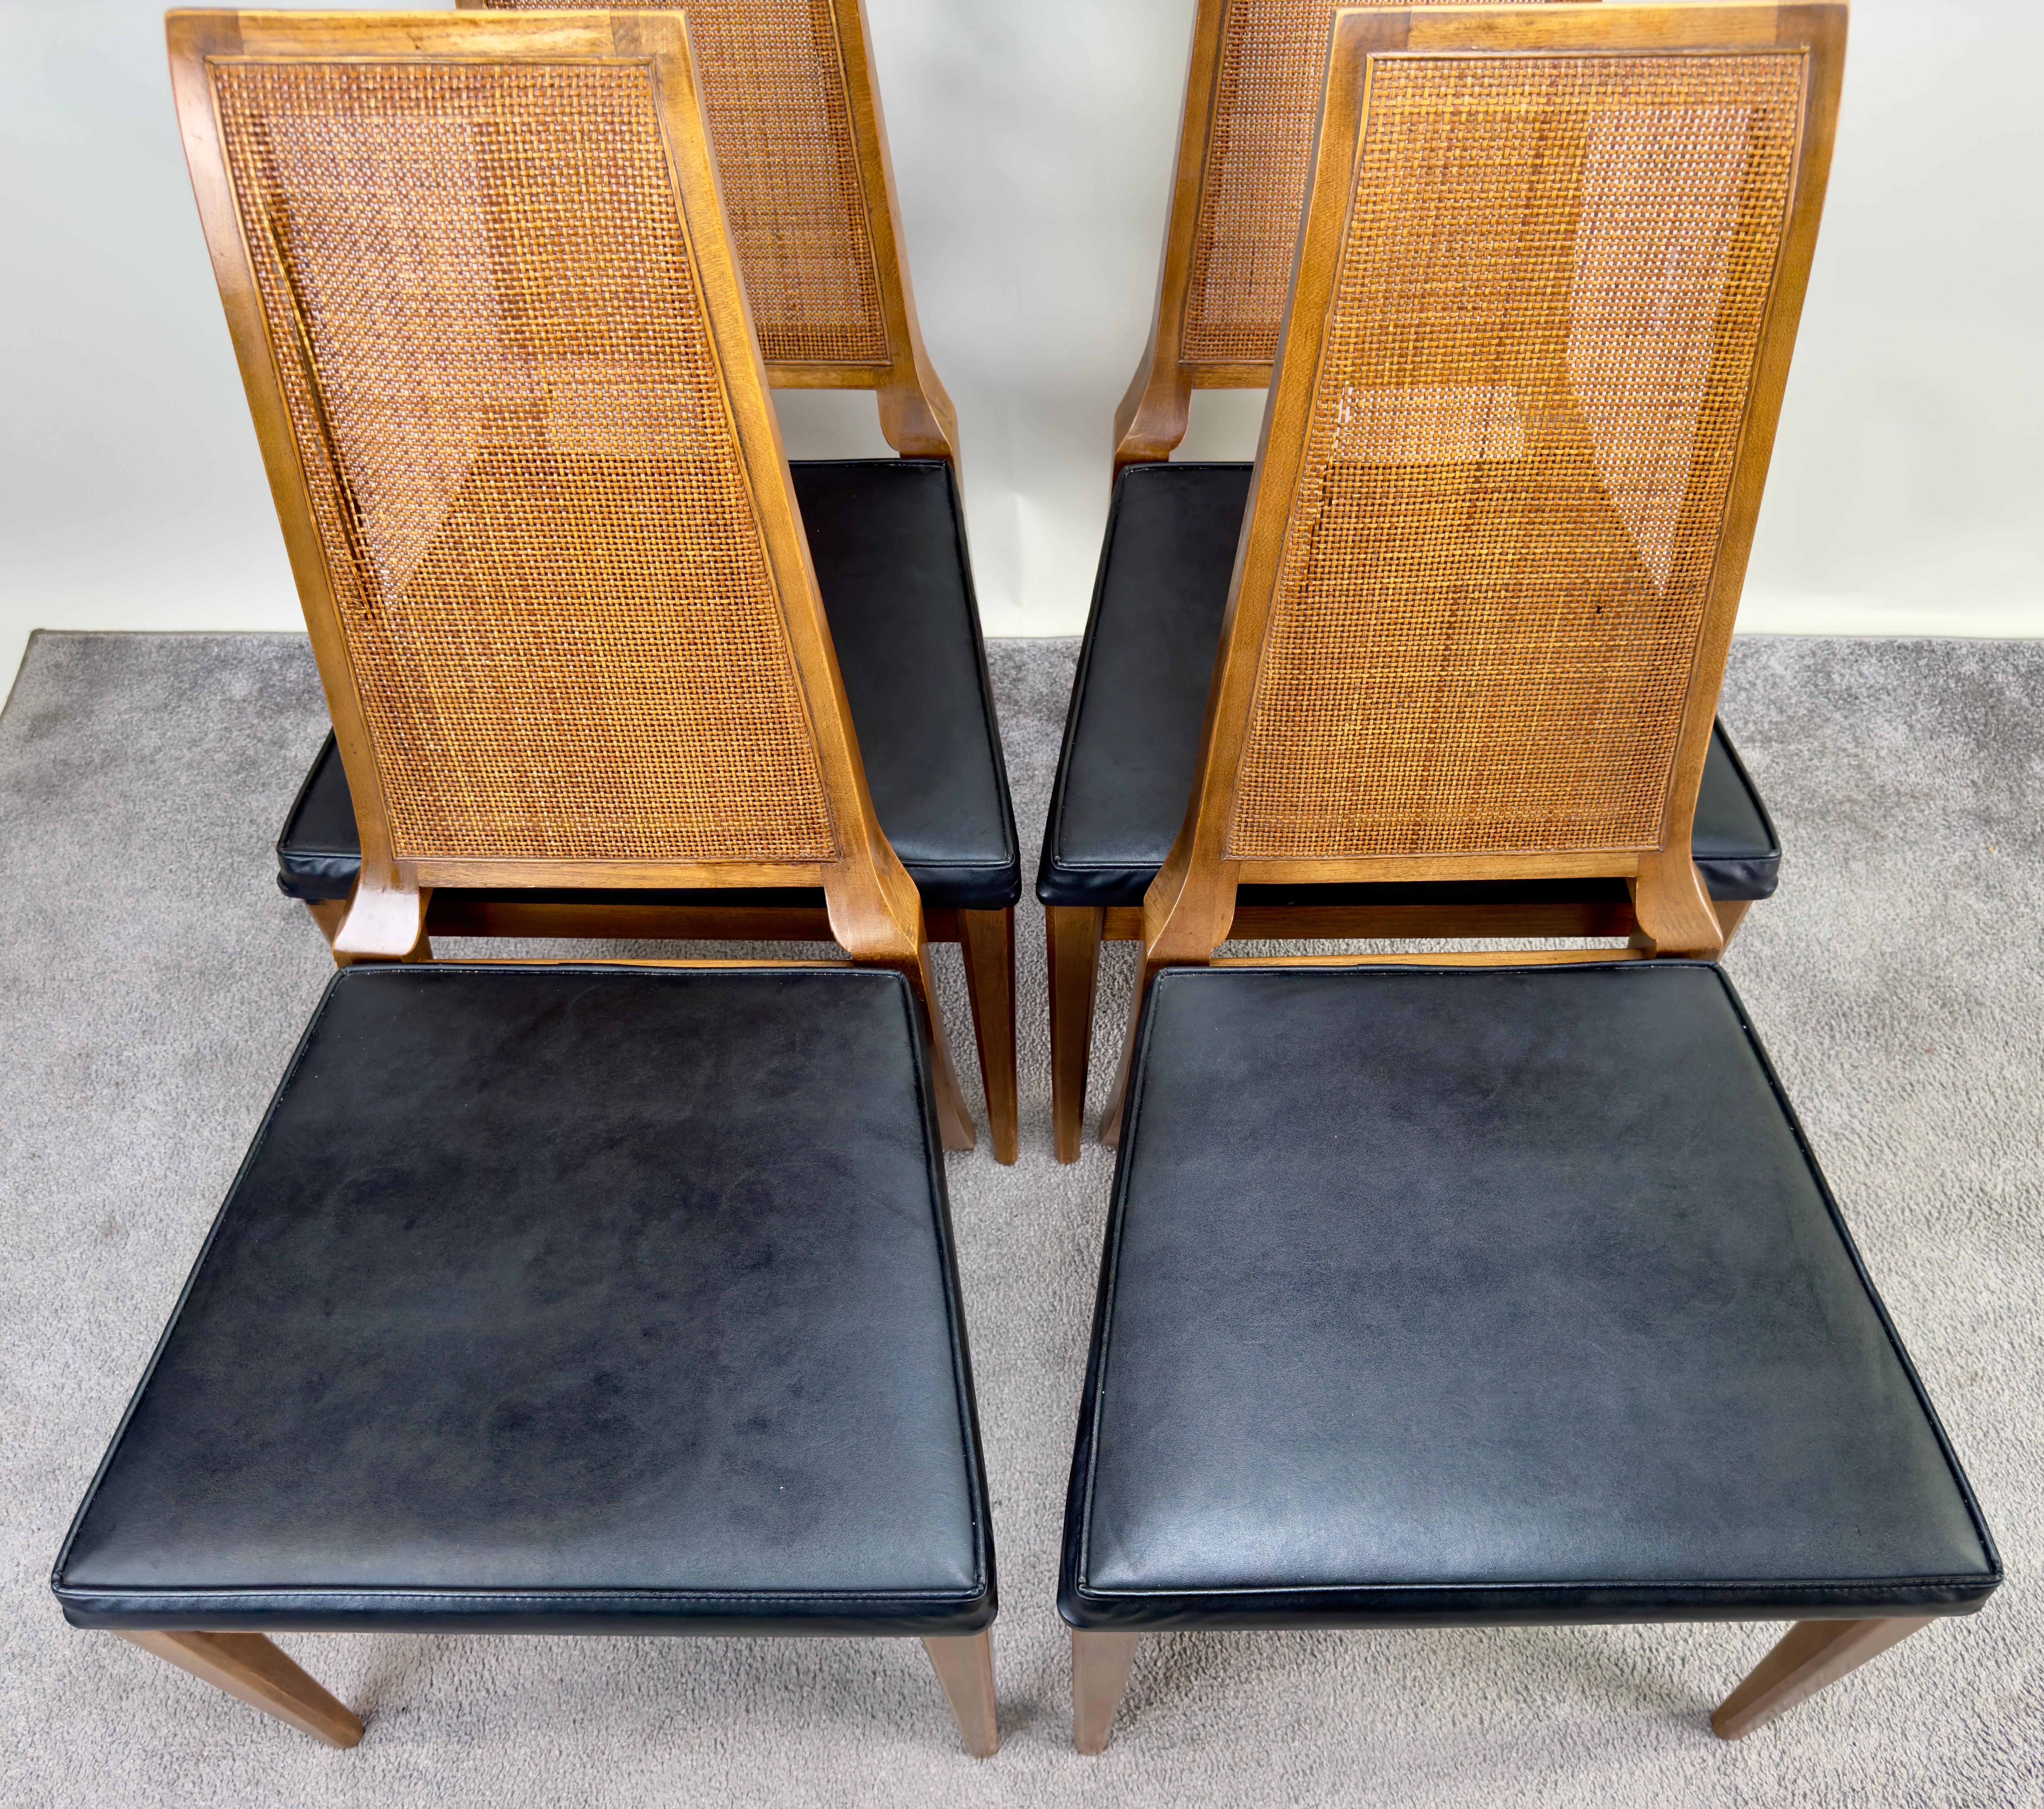 20th Century Mid Century Modern Walnut & Cane Dining Chair by American of Martinsville, 6 pcs For Sale